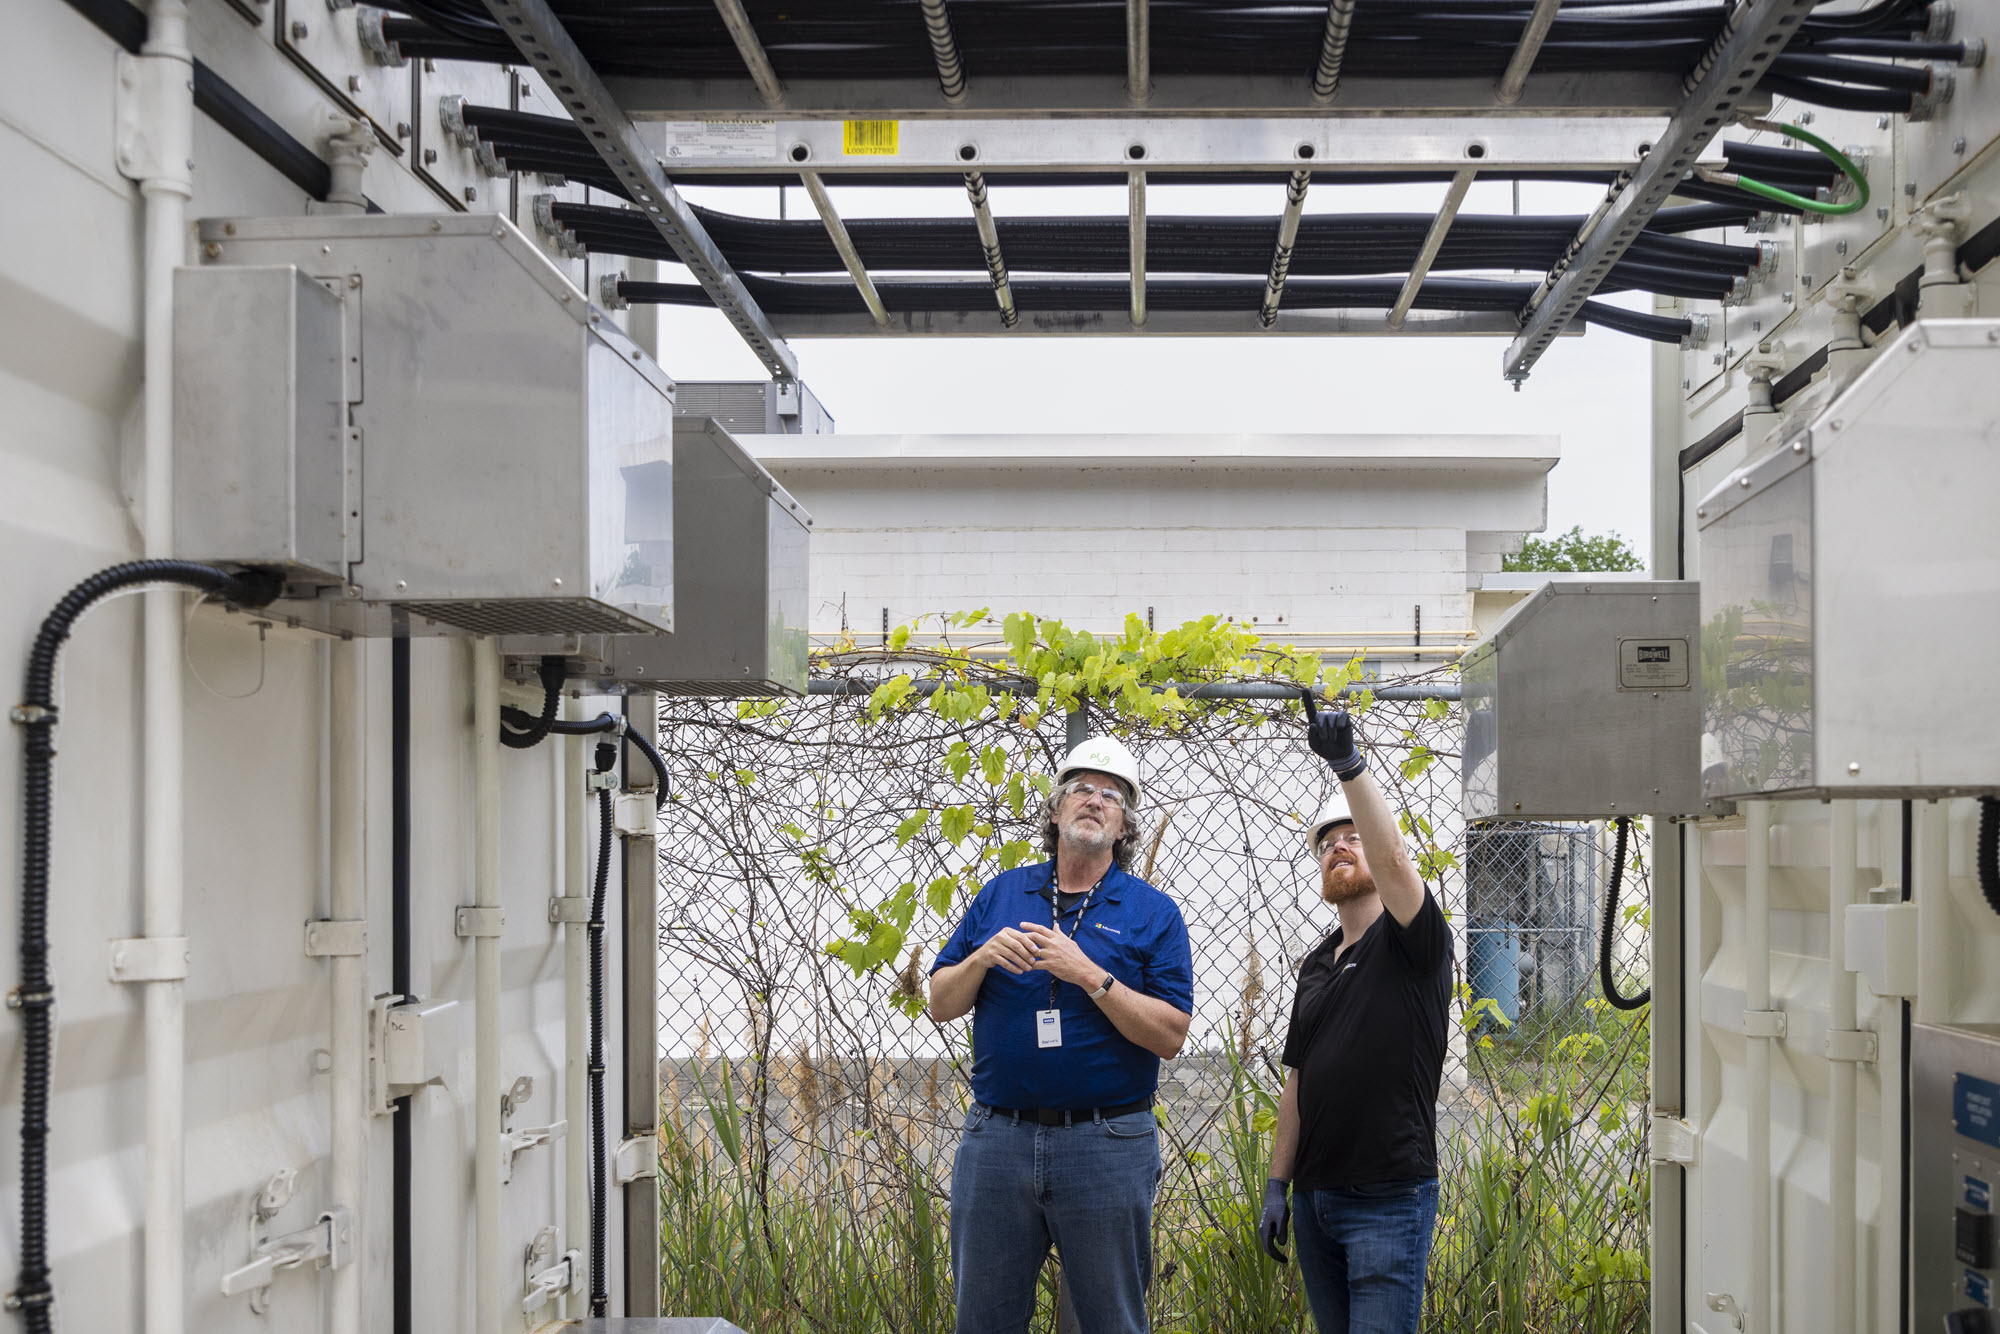 Mark Monroe, a principal infrastructure engineer on Microsoft’s team for datacenter advanced development, and Sean James, Microsoft’s director of datacenter research, stand between the two shipping containers and discuss the three-megawatt hydrogen fuel cell system